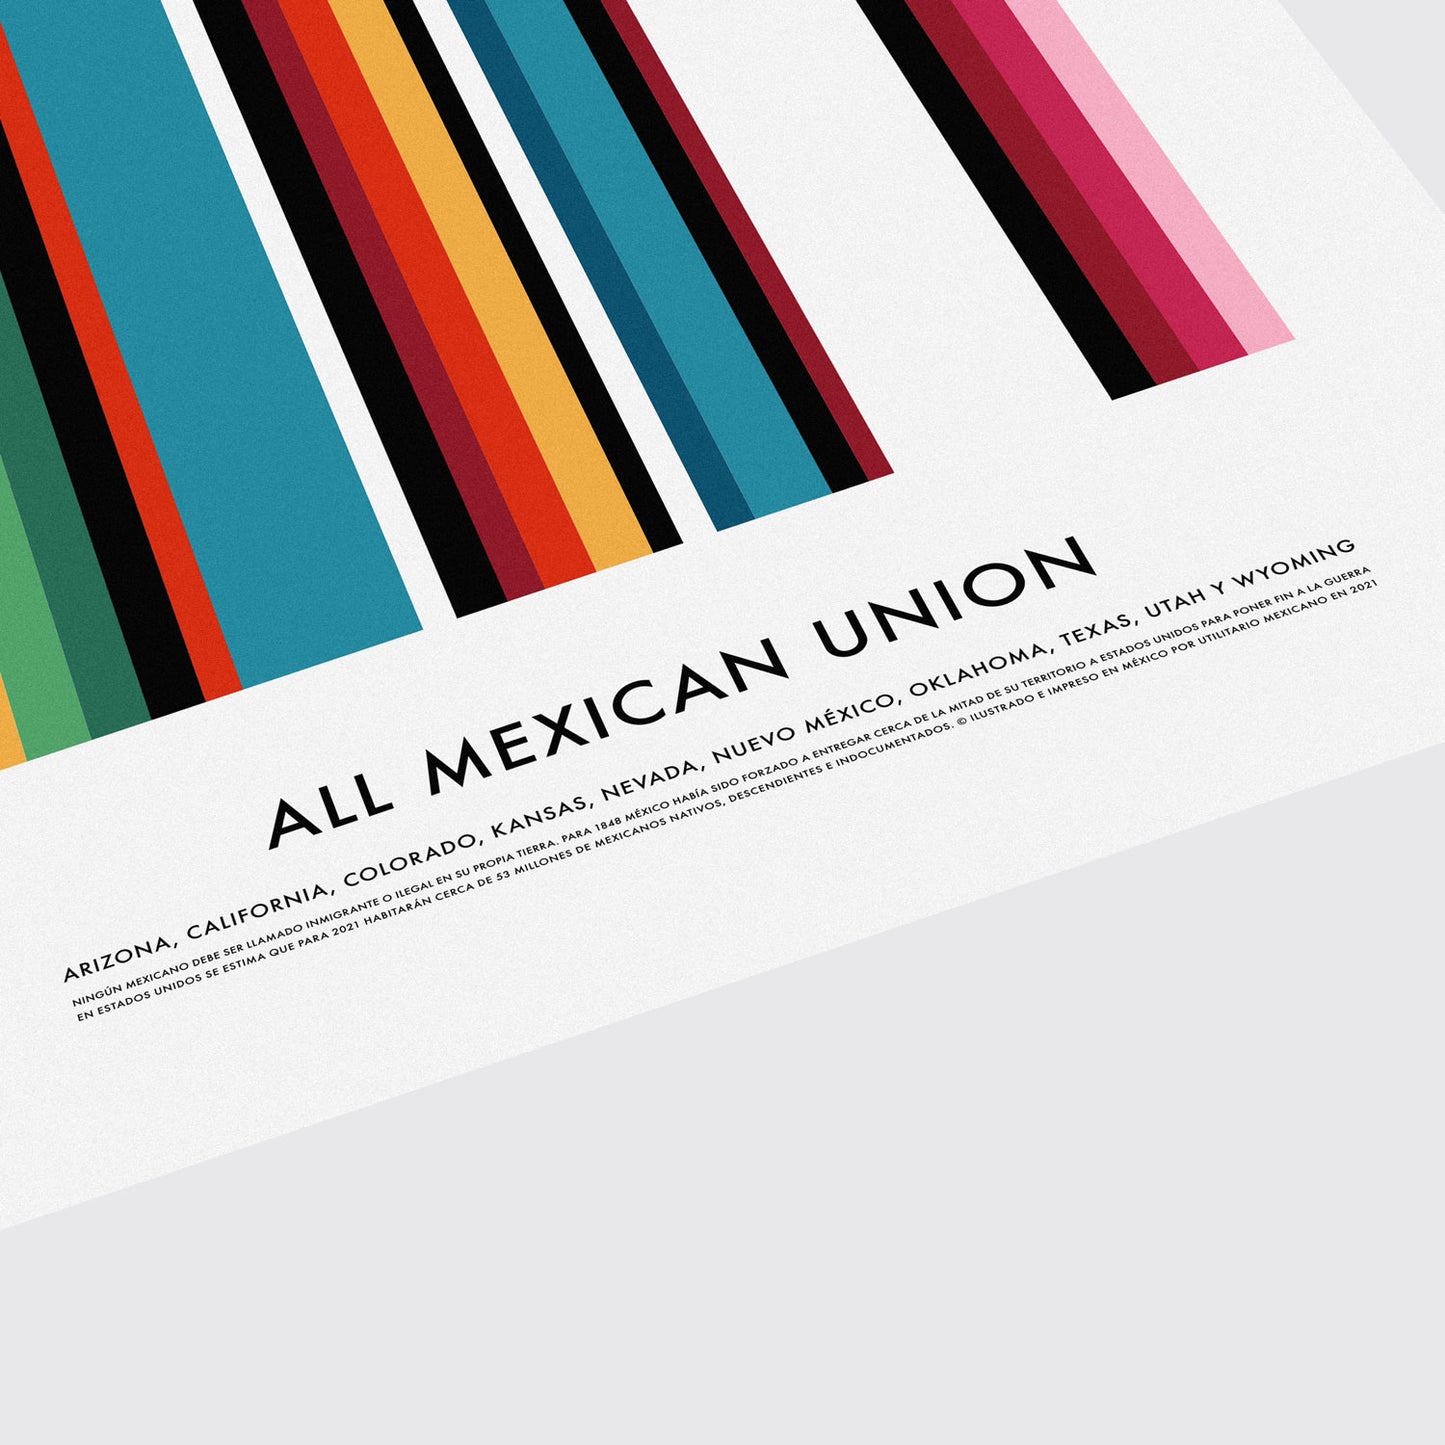 POSTER ALL MEXICAN UNION